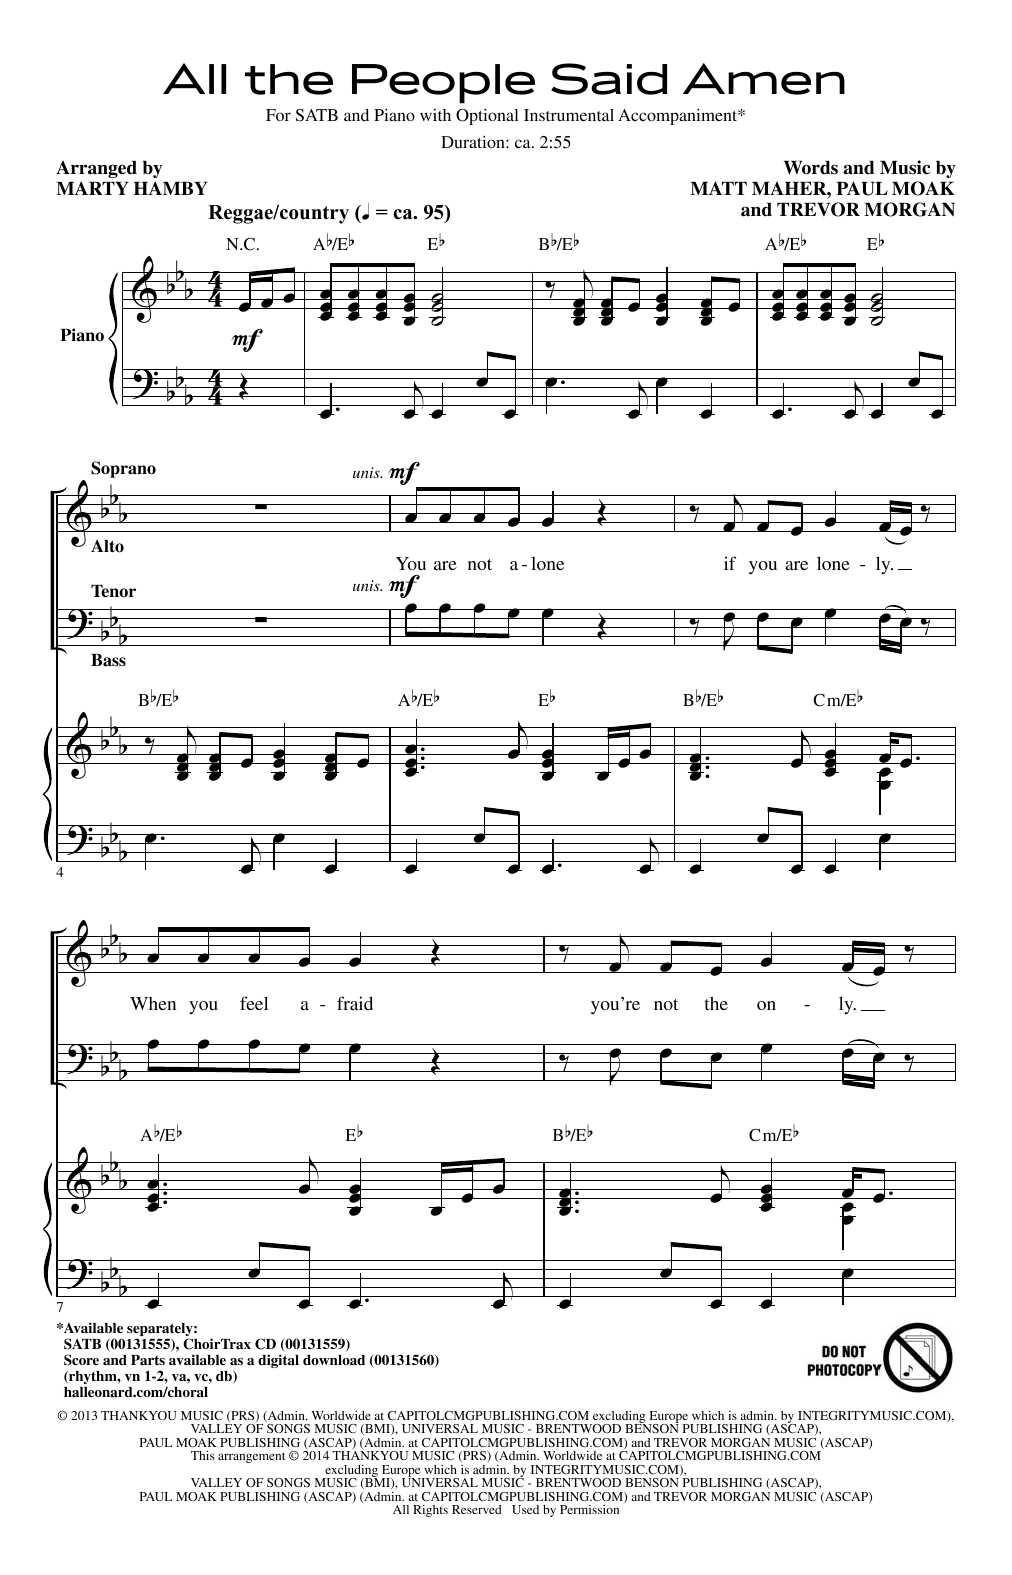 Download Marty Hamby All The People Said Amen Sheet Music